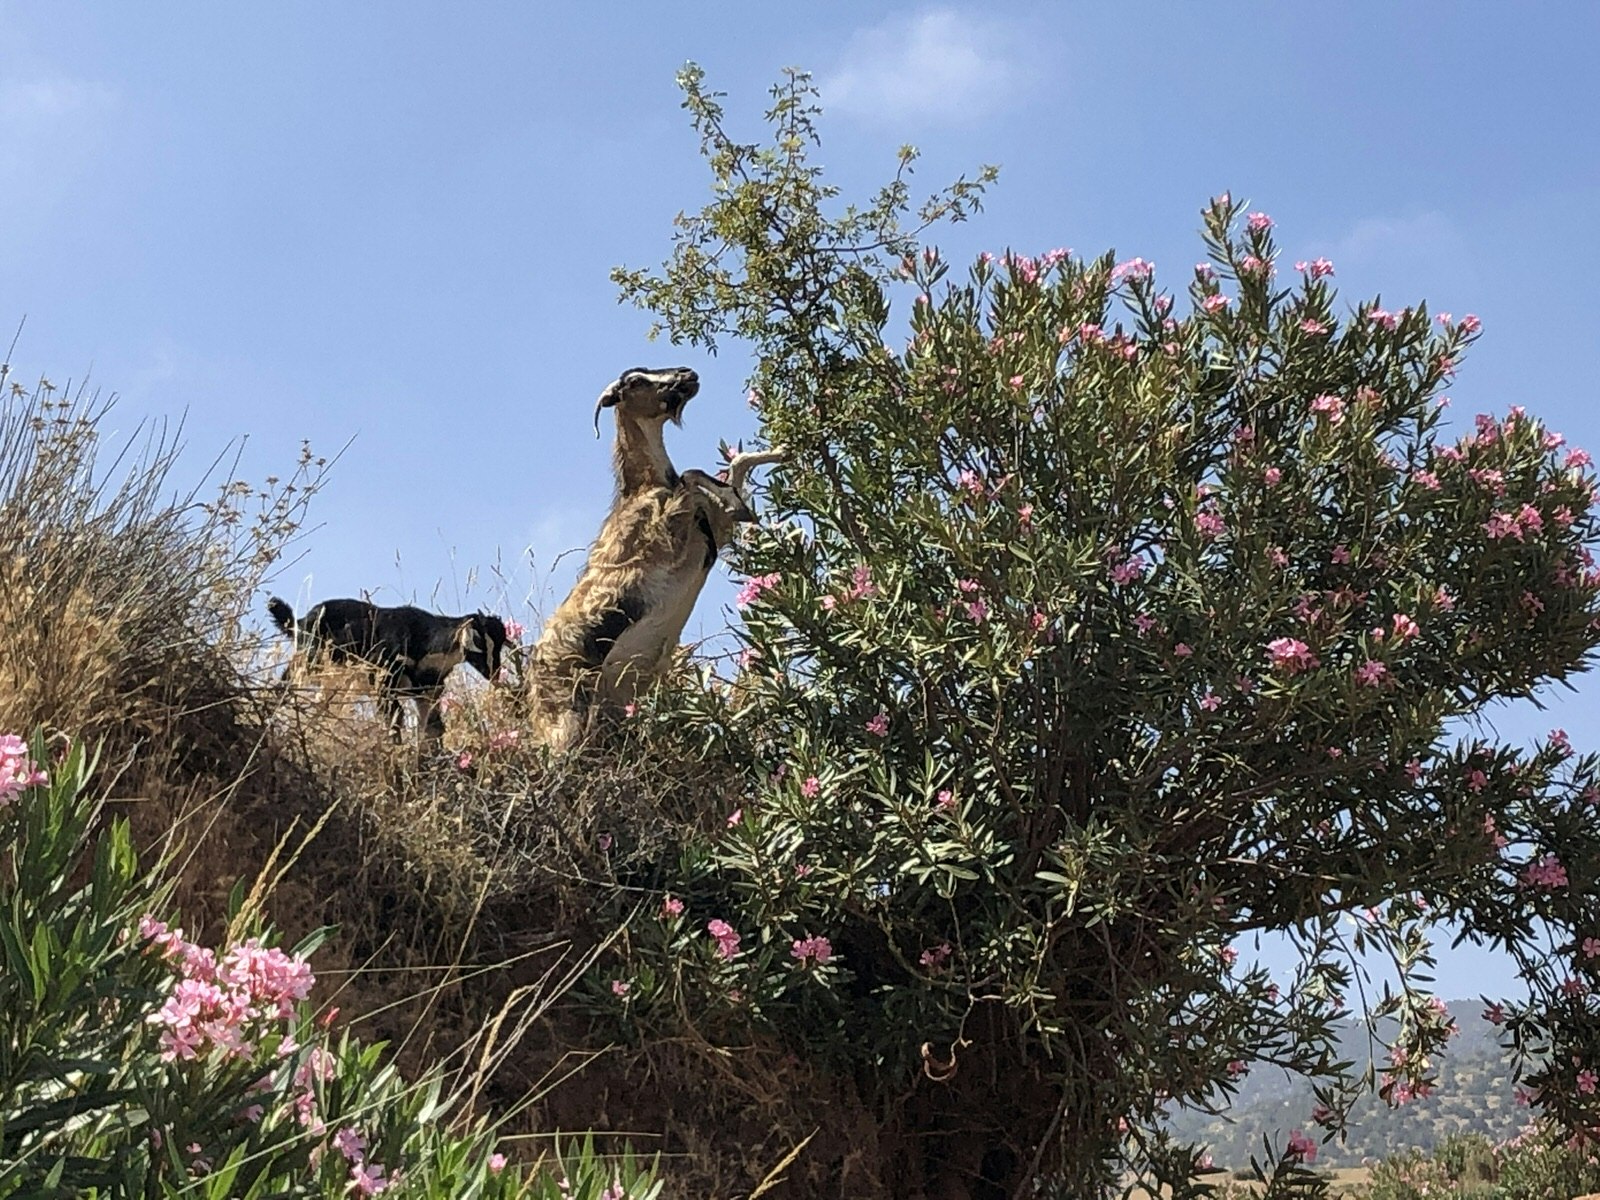 A pair of goats climbing up some flowering plants to eat the green shoots.